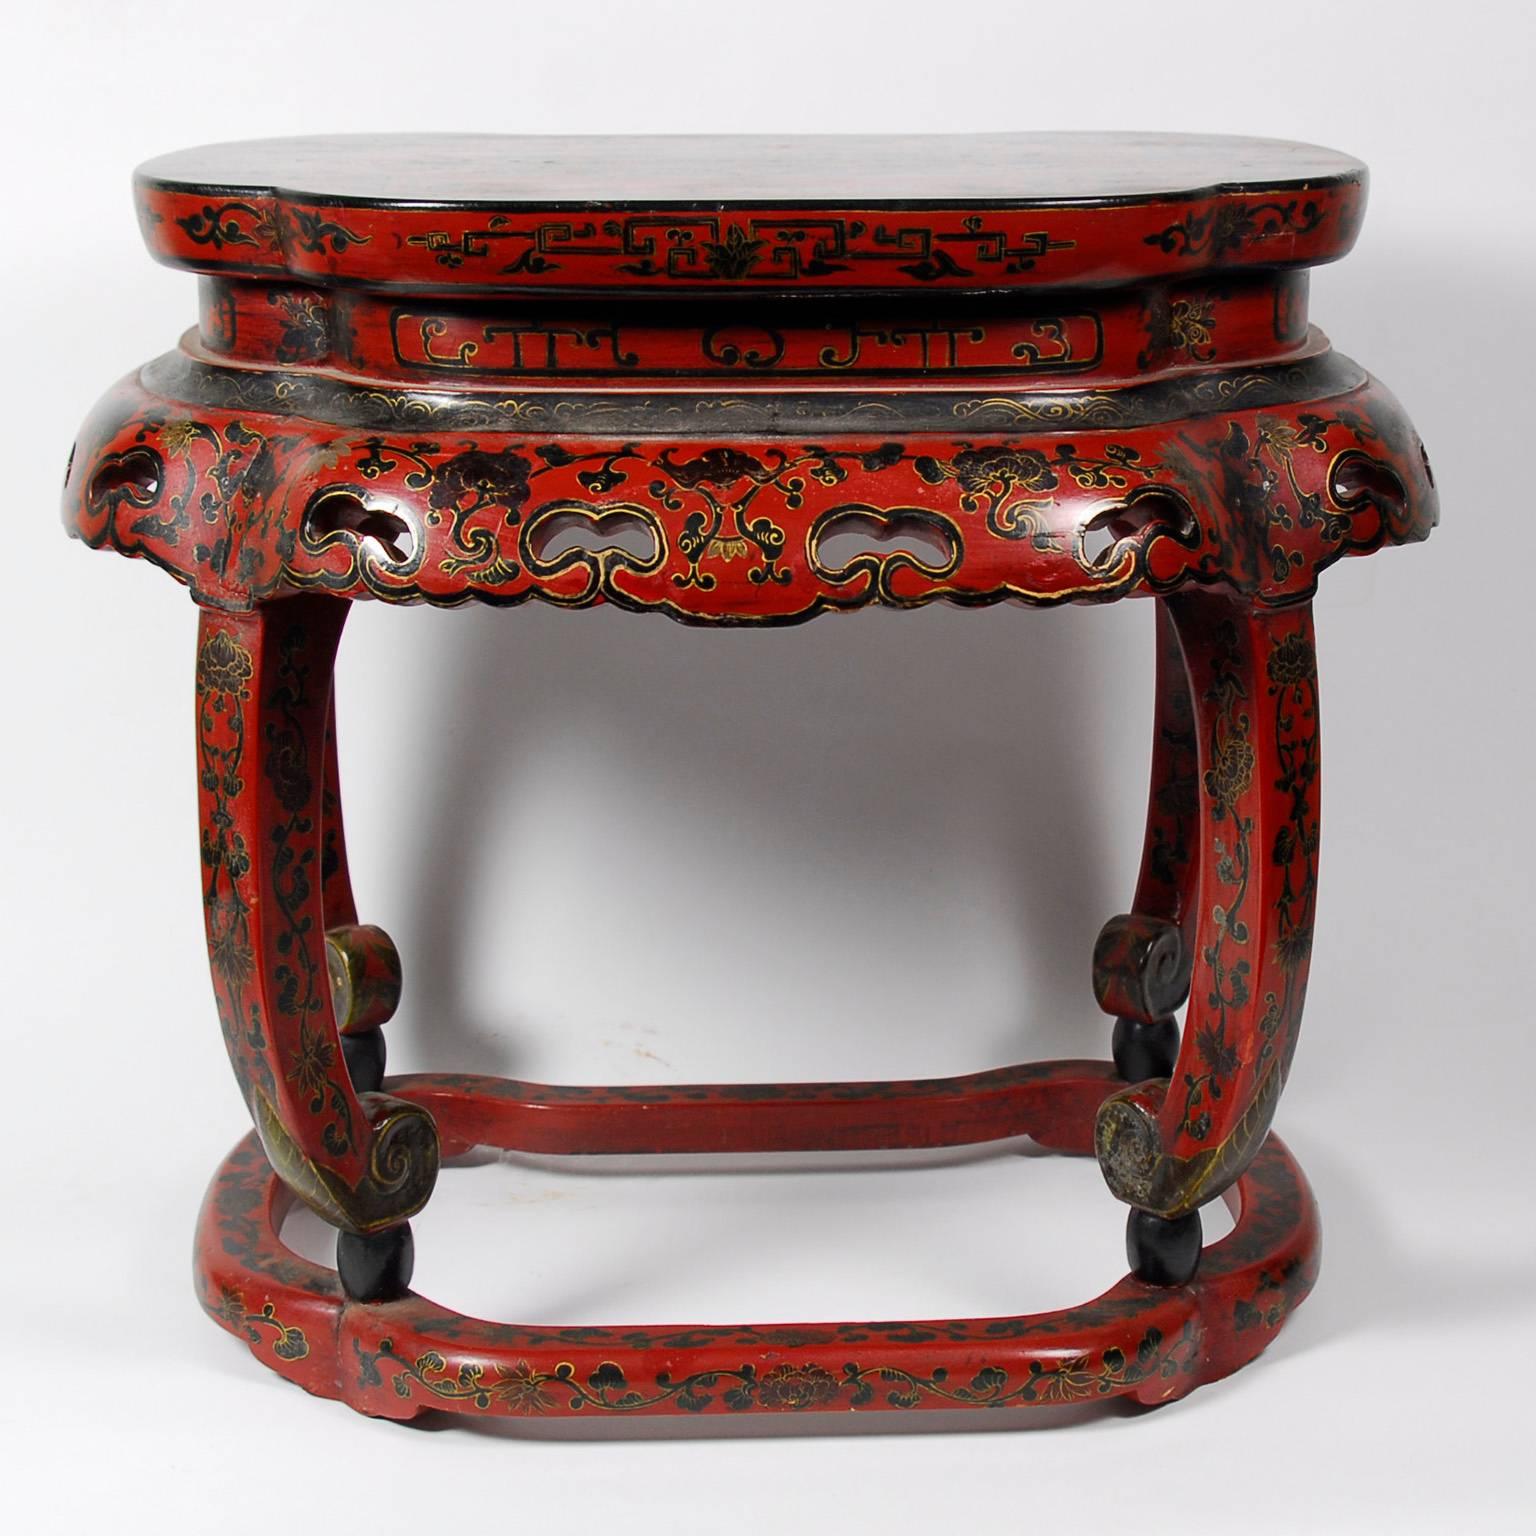 Pair of late 19th to early 20th Century Chinese Red and Black Lacquer Side Tables, each with pierced aprons and floral decoration, raised on curved legs ending in scroll feet. Dimensions: 20 1/2 x 23 x 16 inches